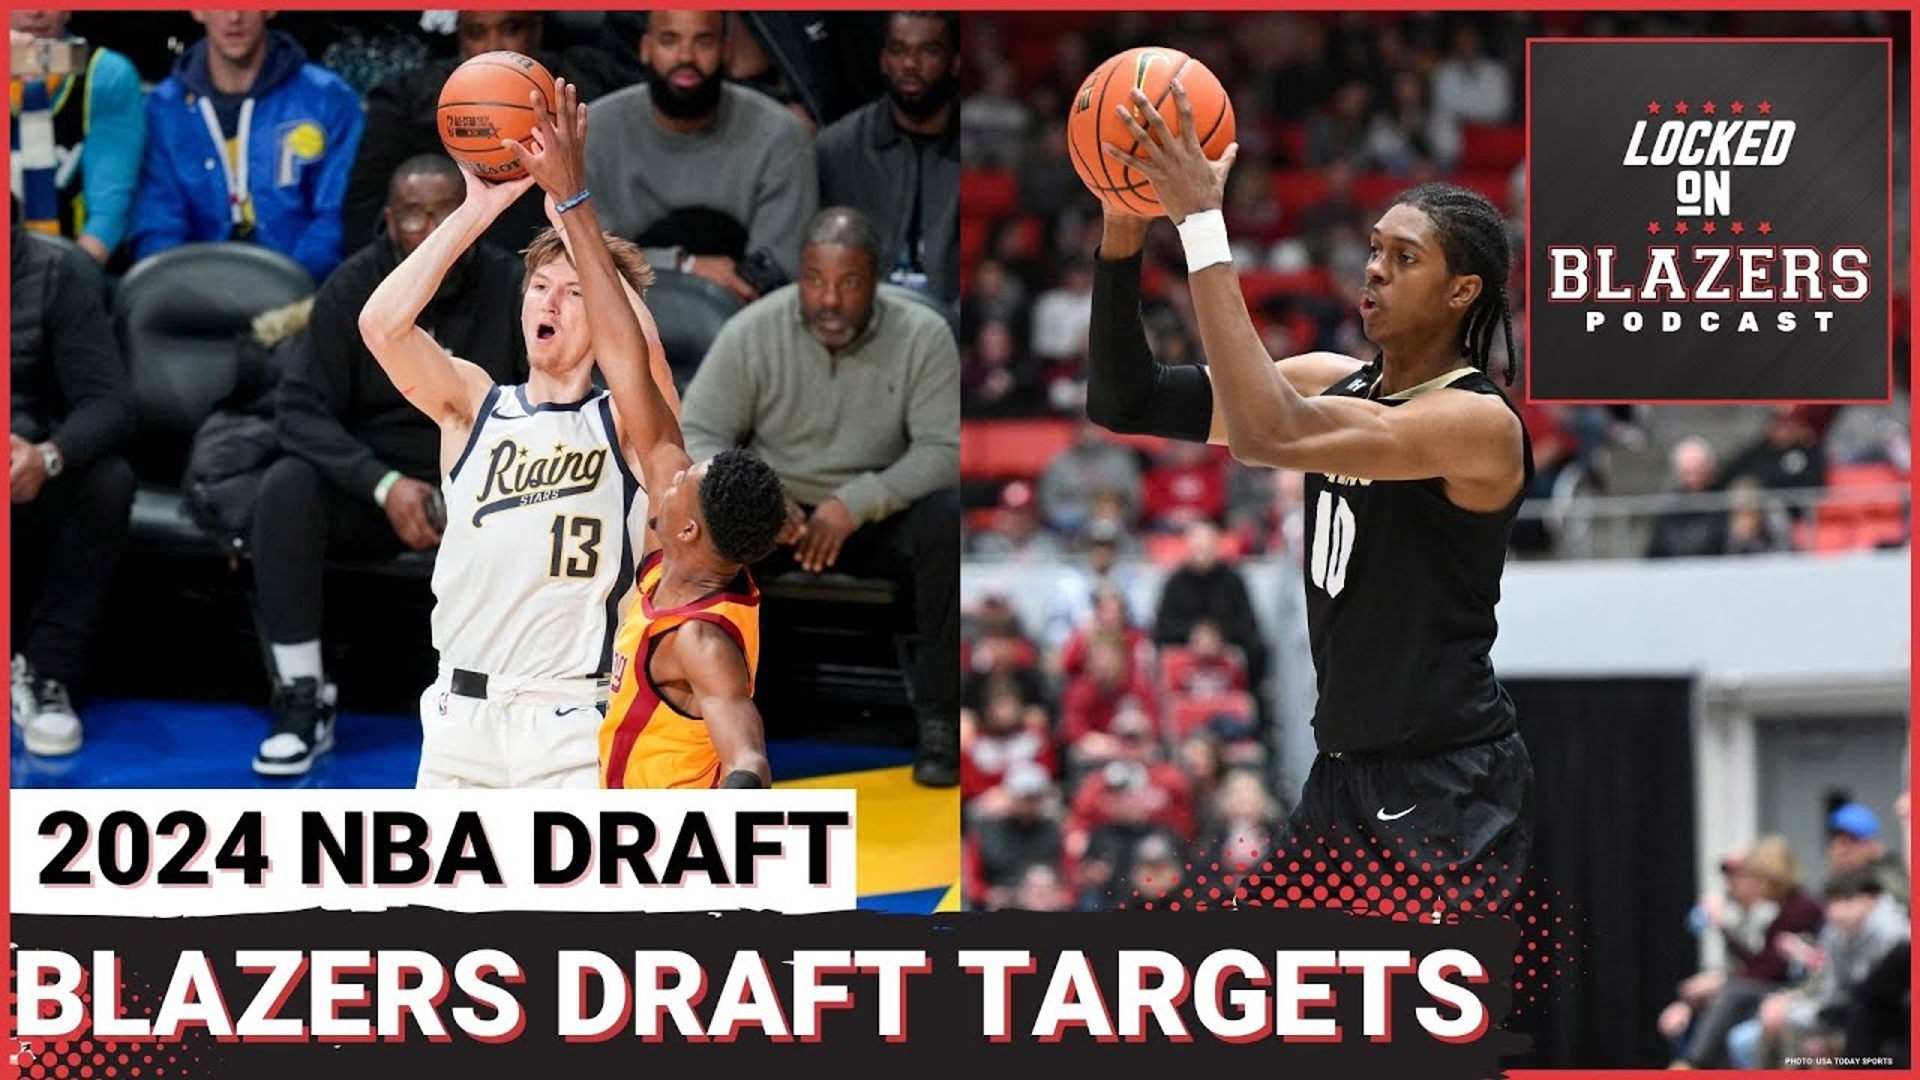 Mock Draft Trail Blazers Targets at All 4 Picks in 2024 NBA Draft with